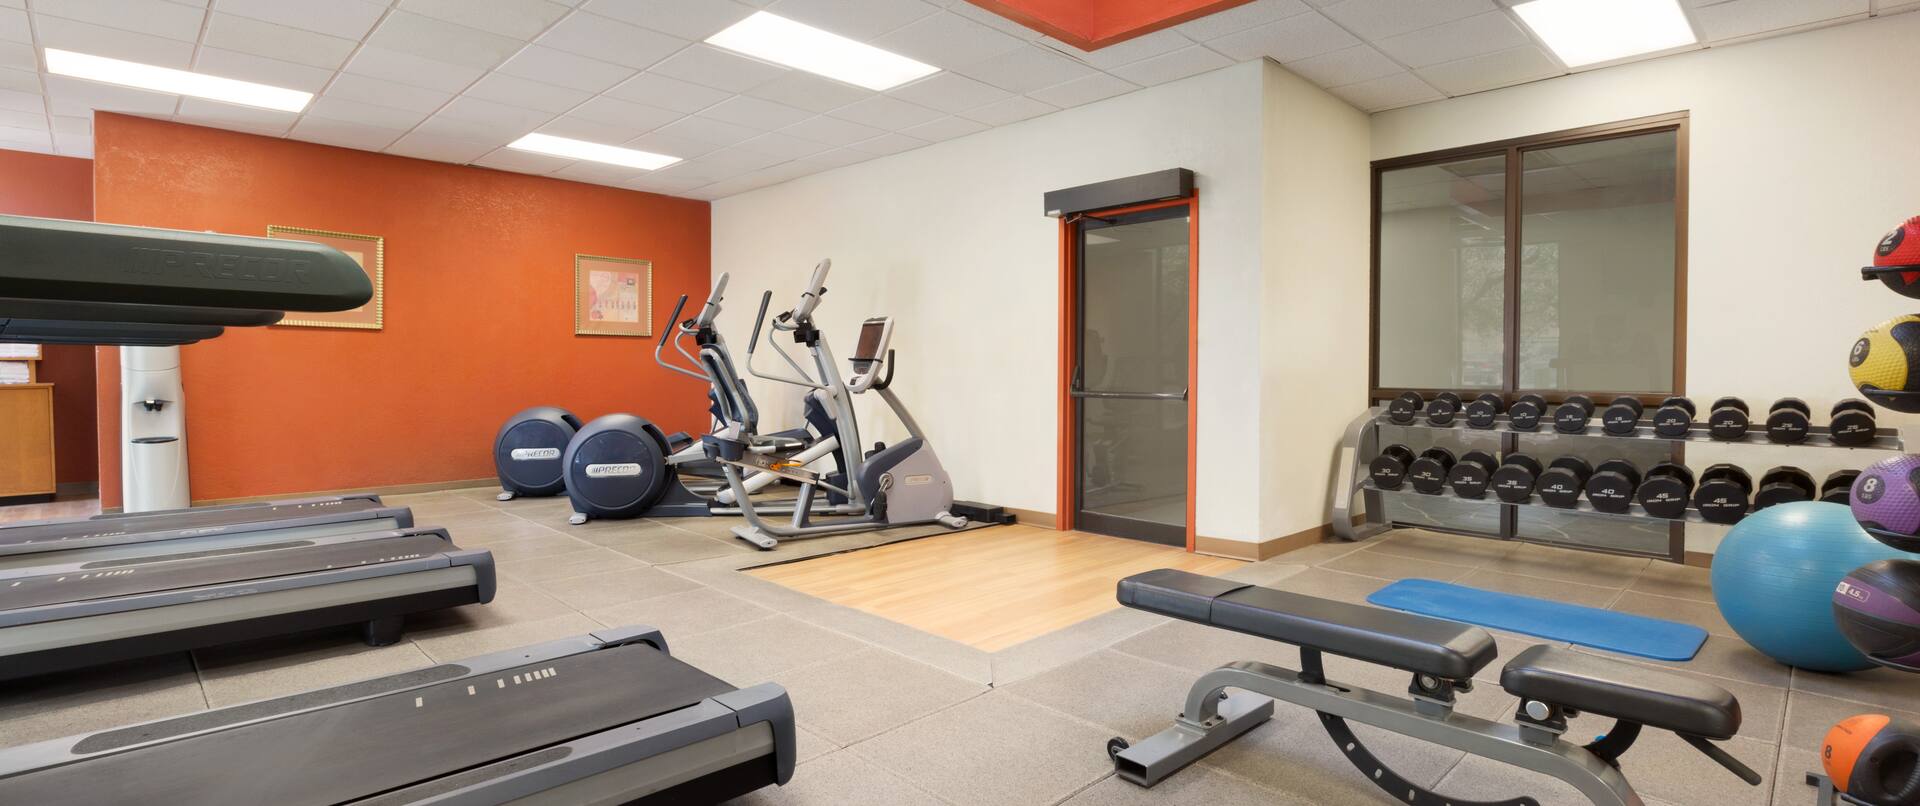 Fitness center with cardio machines and bench